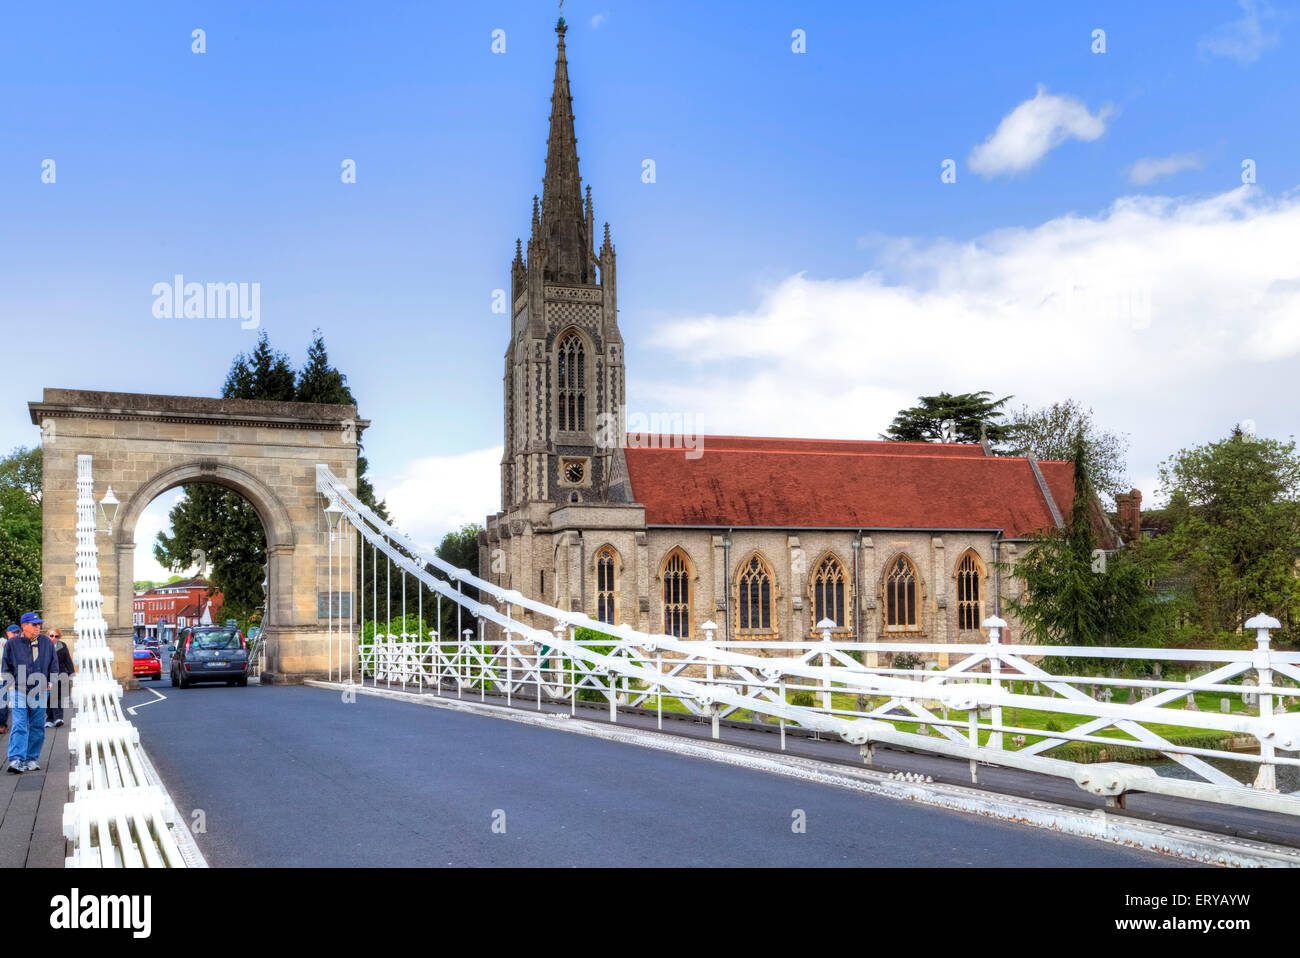 Marlow, Buckinghamshire, Angleterre, Royaume-Uni Banque D'Images